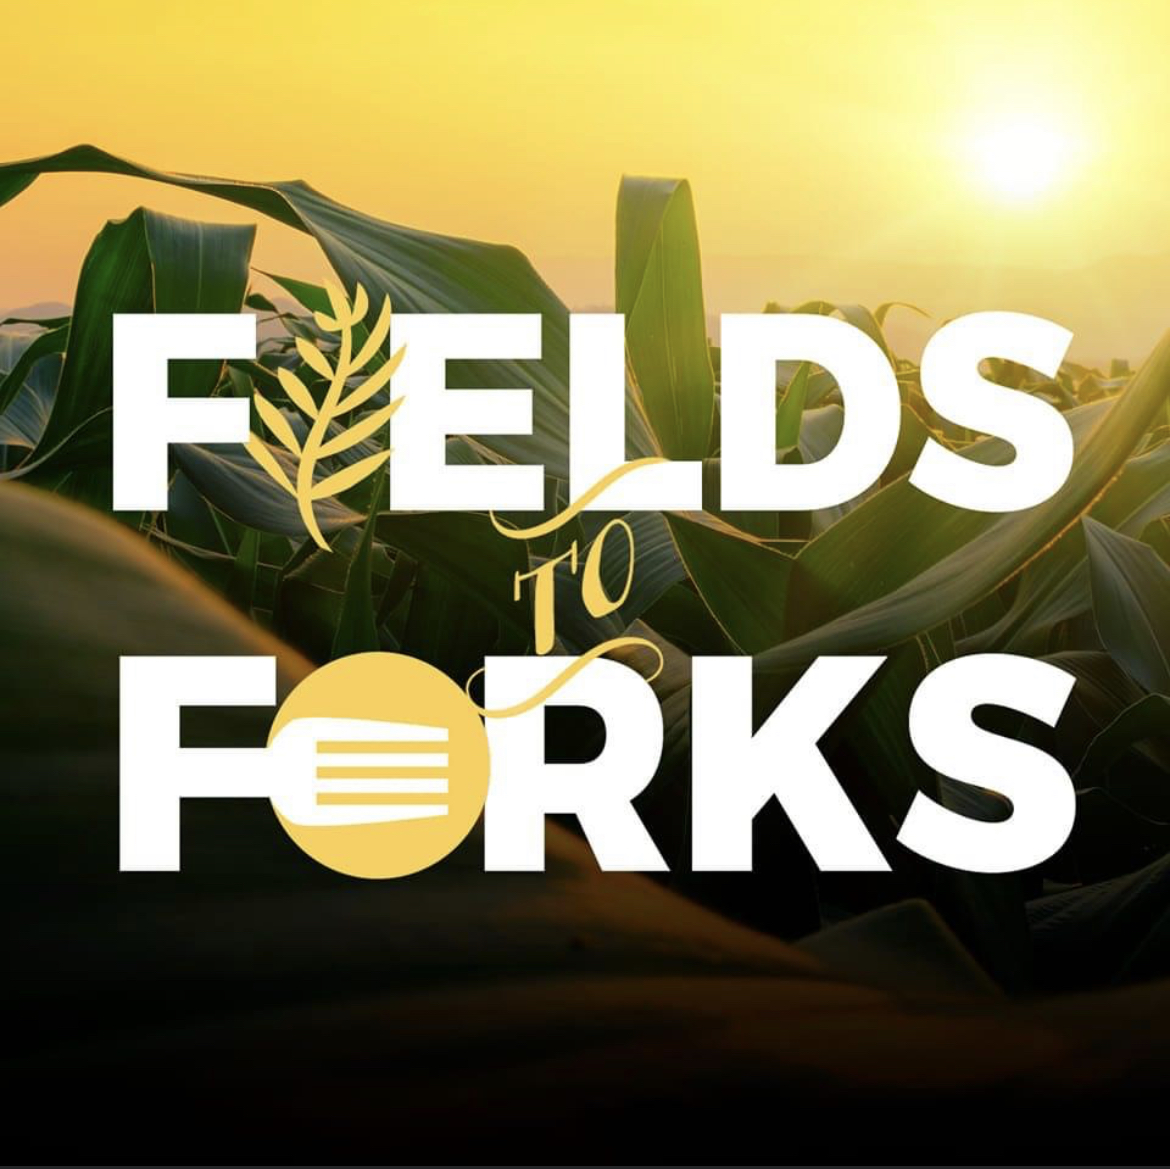 Field to Forks